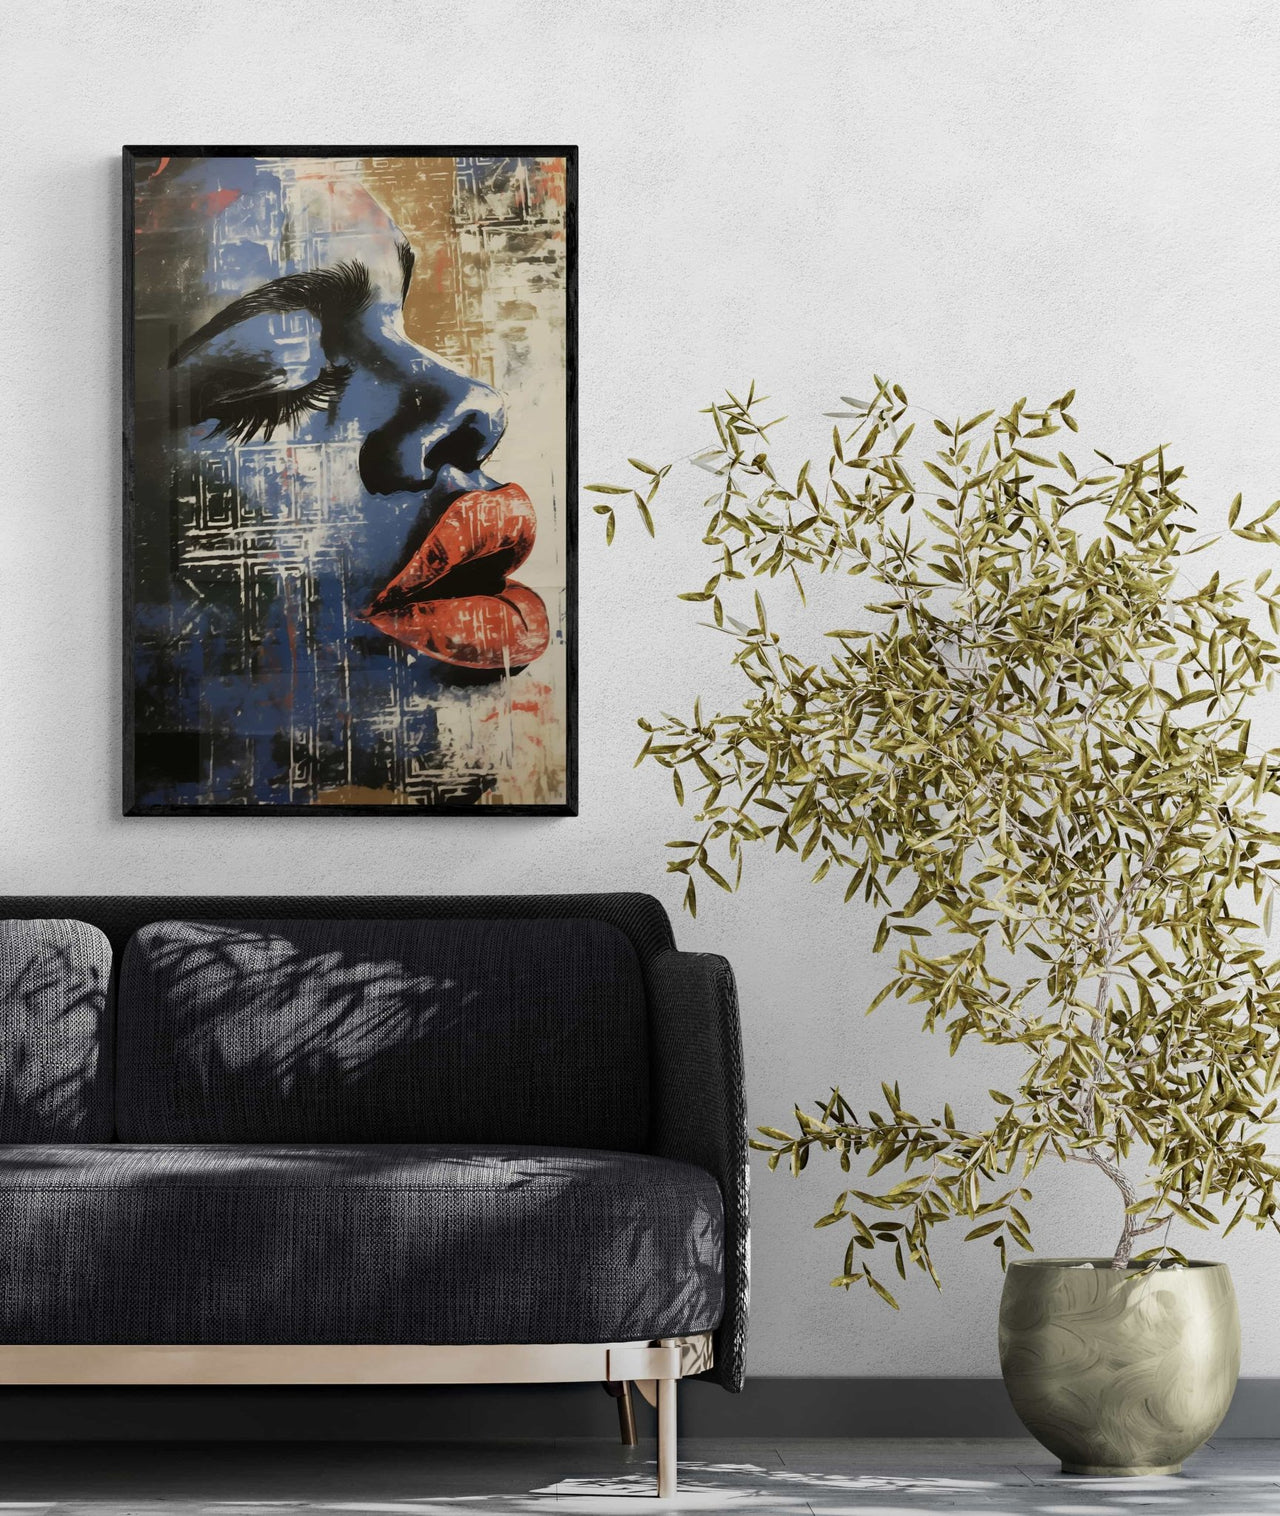 Soulful Serenity: Framed Canvas Print of Meditative African-American Woman - Milton Wes Art Posters, Prints, & Visual Artwork